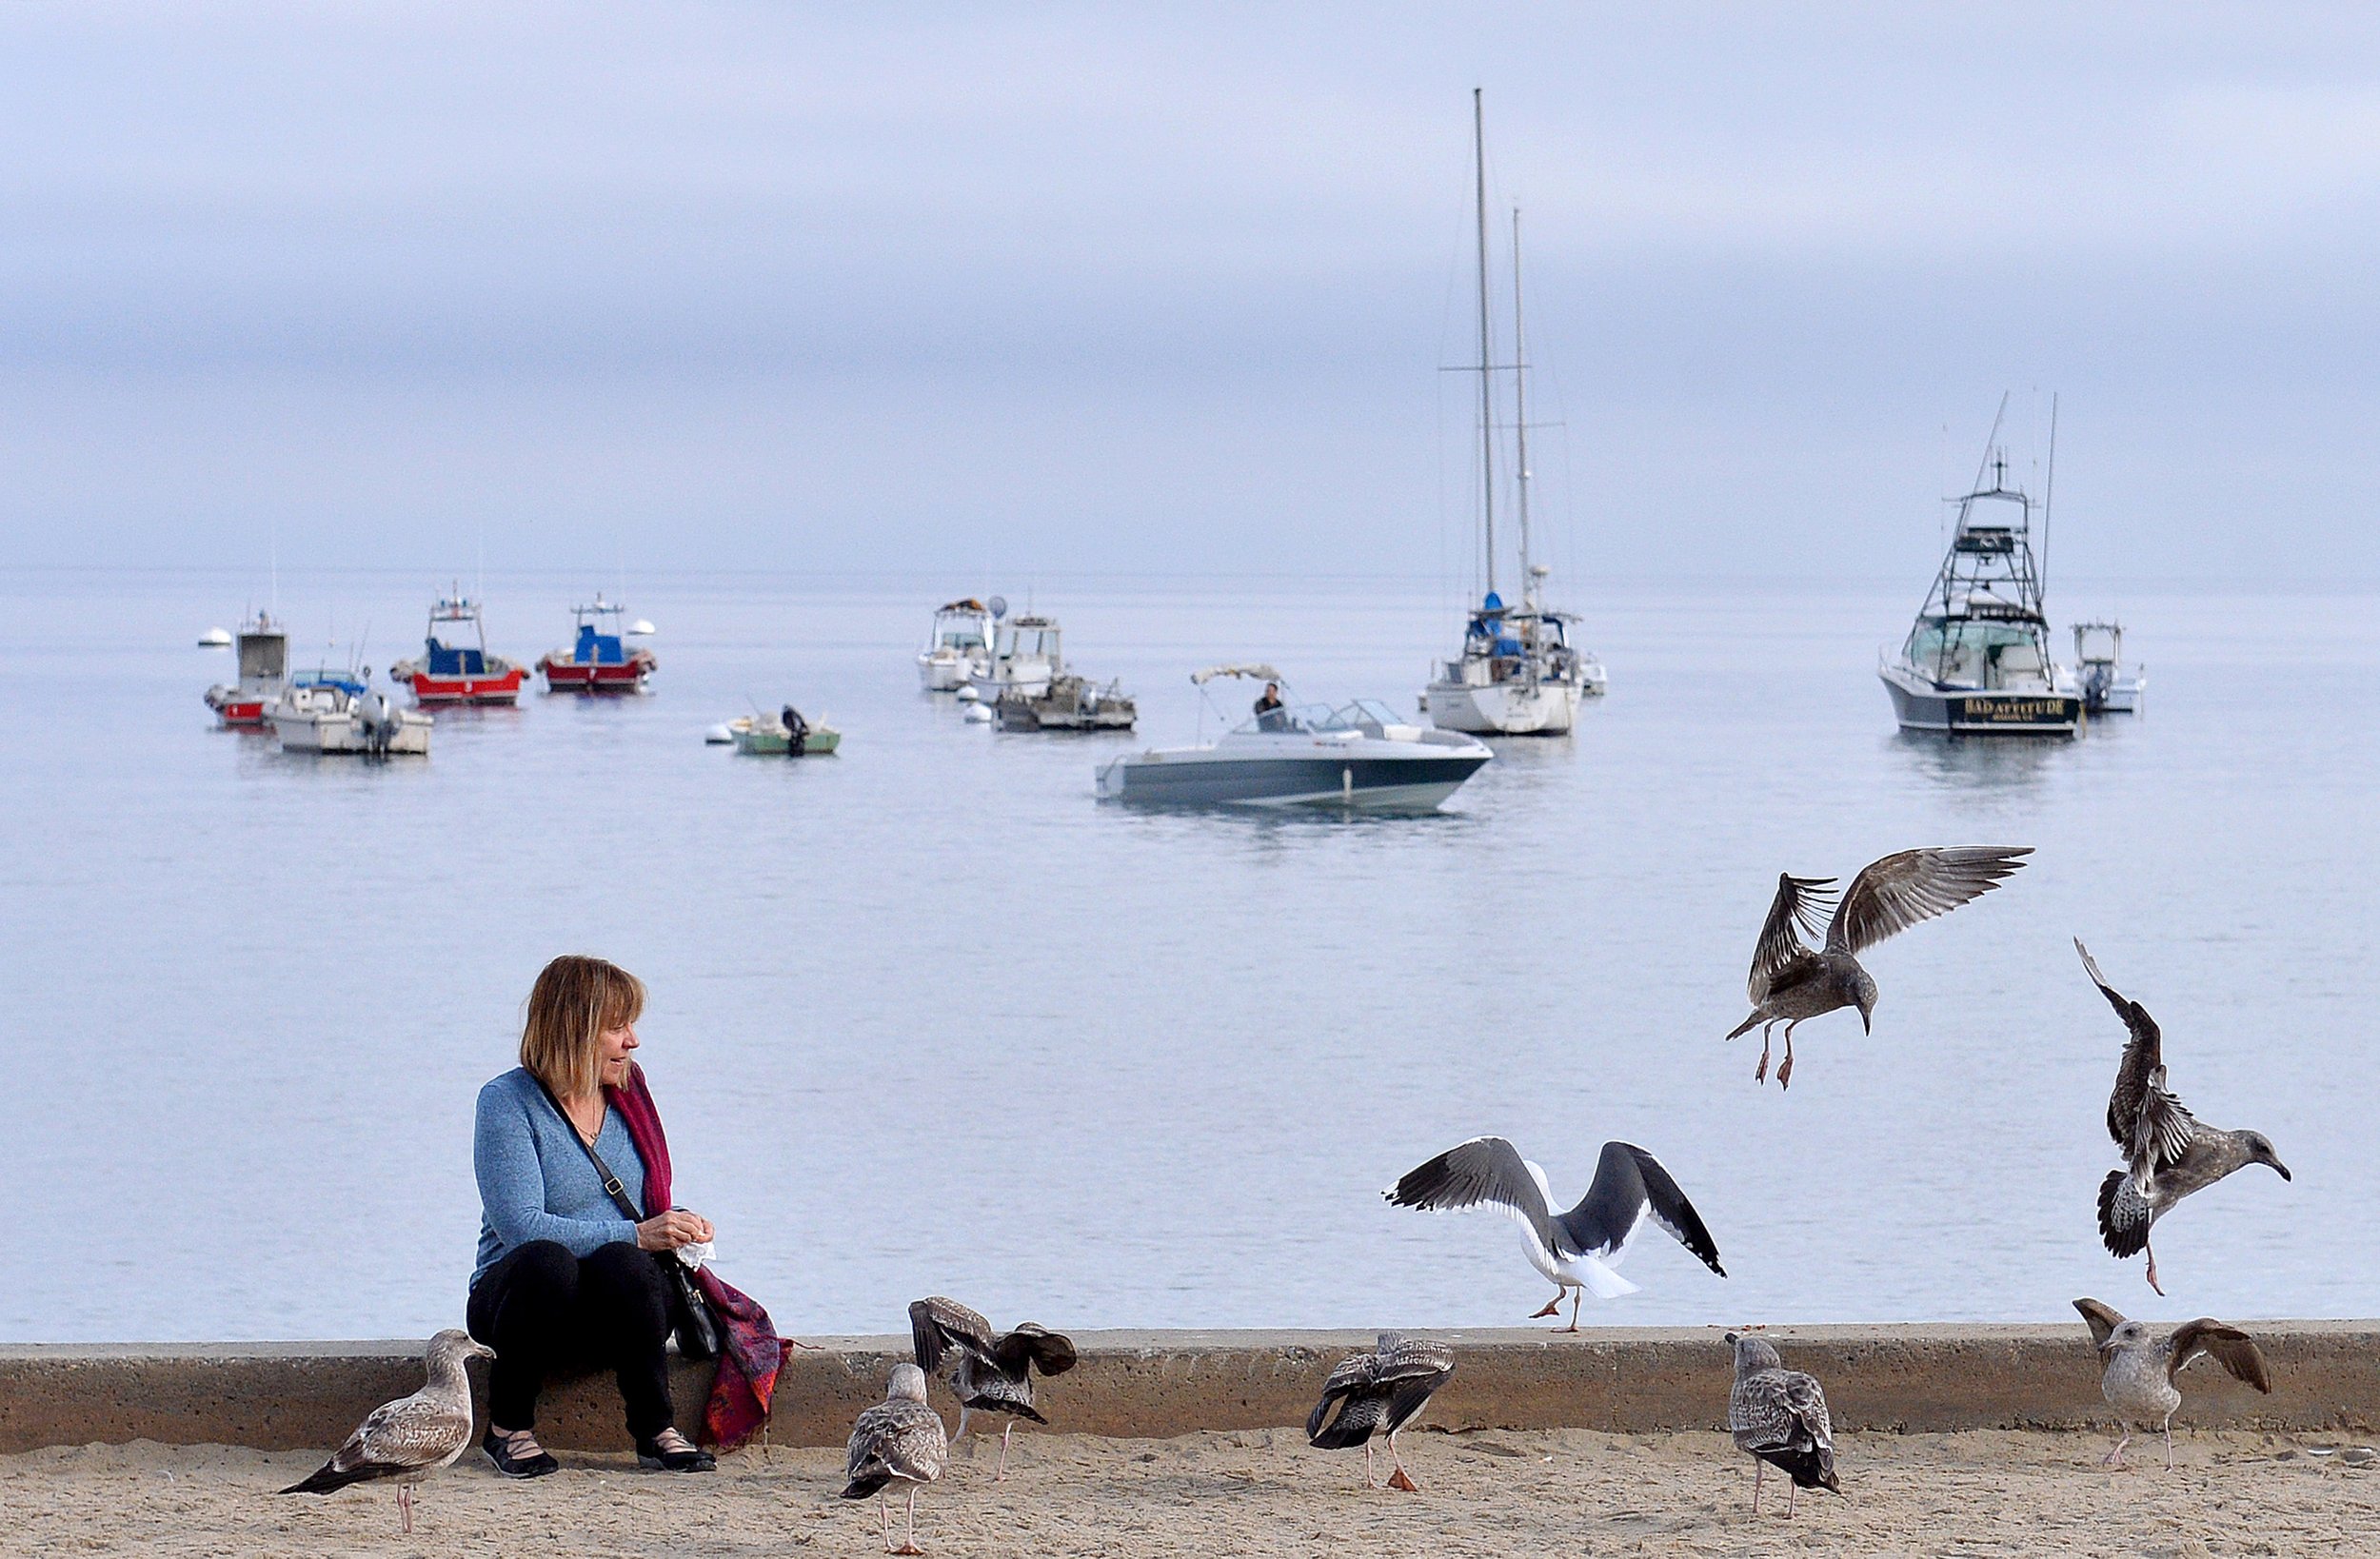  Marie Thibeault from San Pedro, enjoys a moment watching her gull friends in Avalon on Catalina Island on Sunday, Jan. 7, 2018.  (Photo by Dean Musgrove, Los Angeles Daily News/SCNG) 